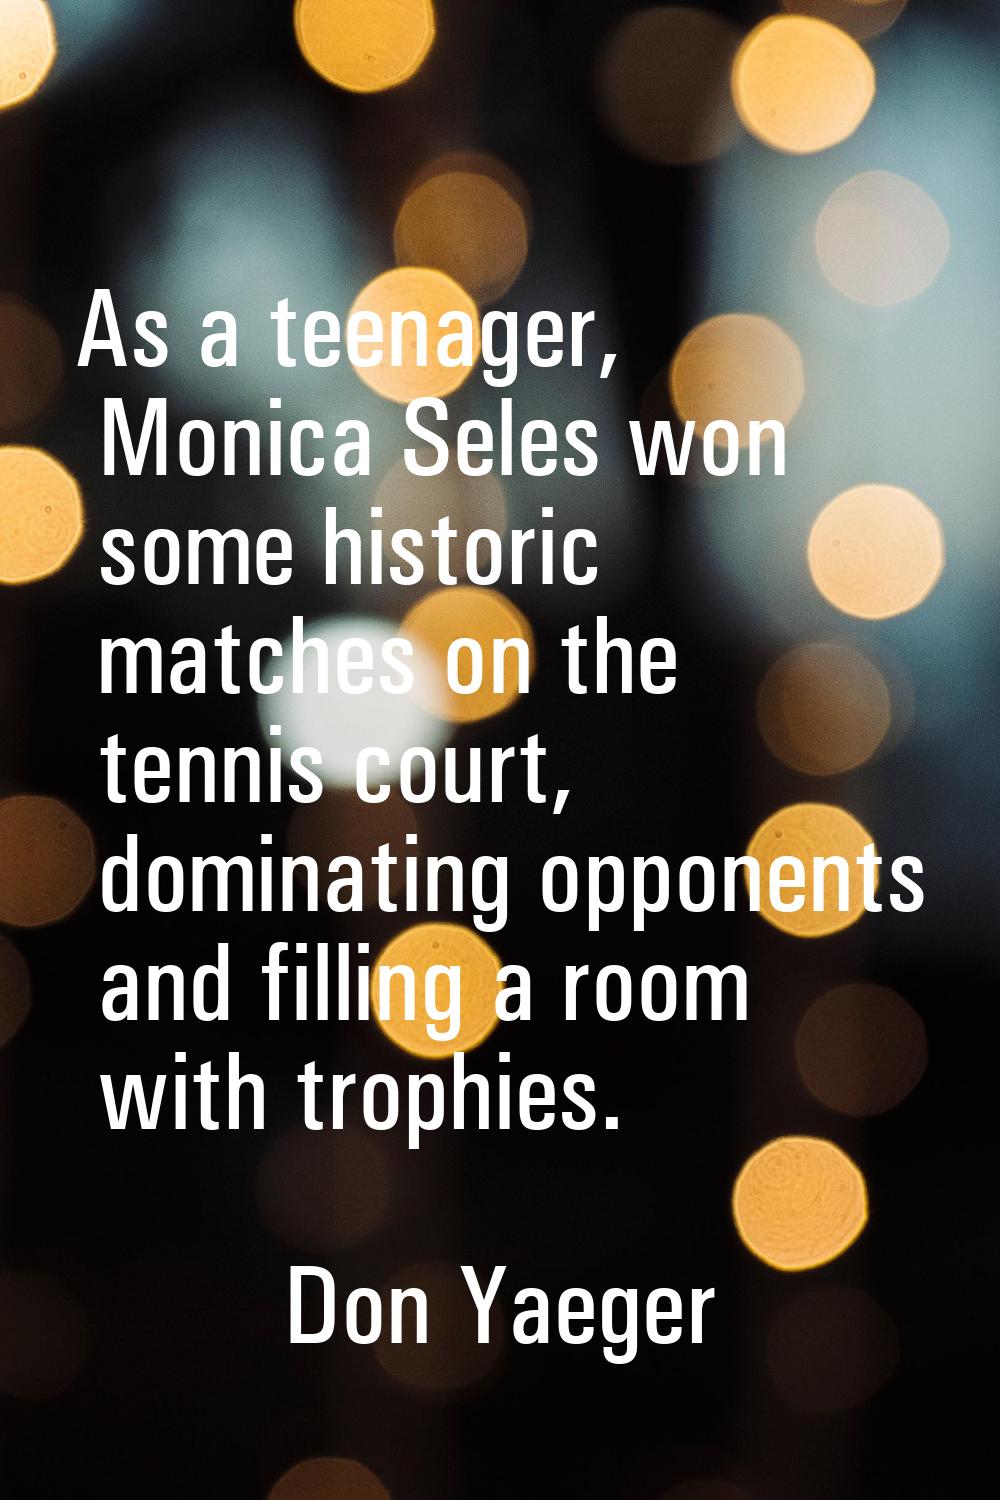 As a teenager, Monica Seles won some historic matches on the tennis court, dominating opponents and